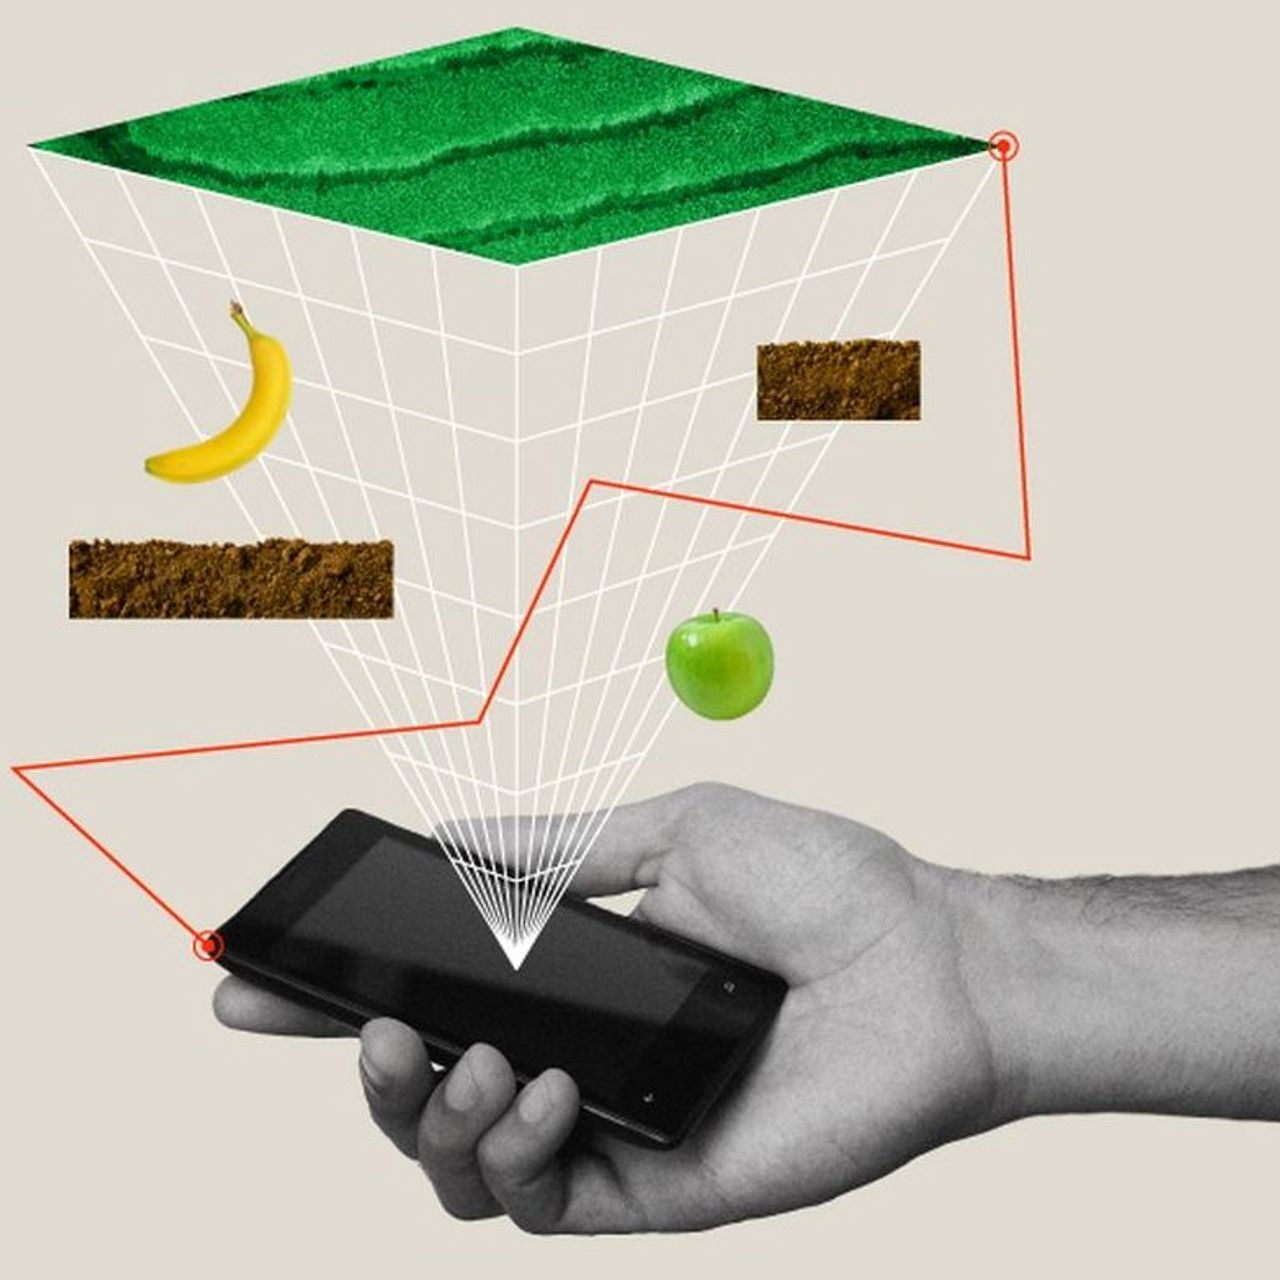 An illustration of the help of a Swiss app to preserve food